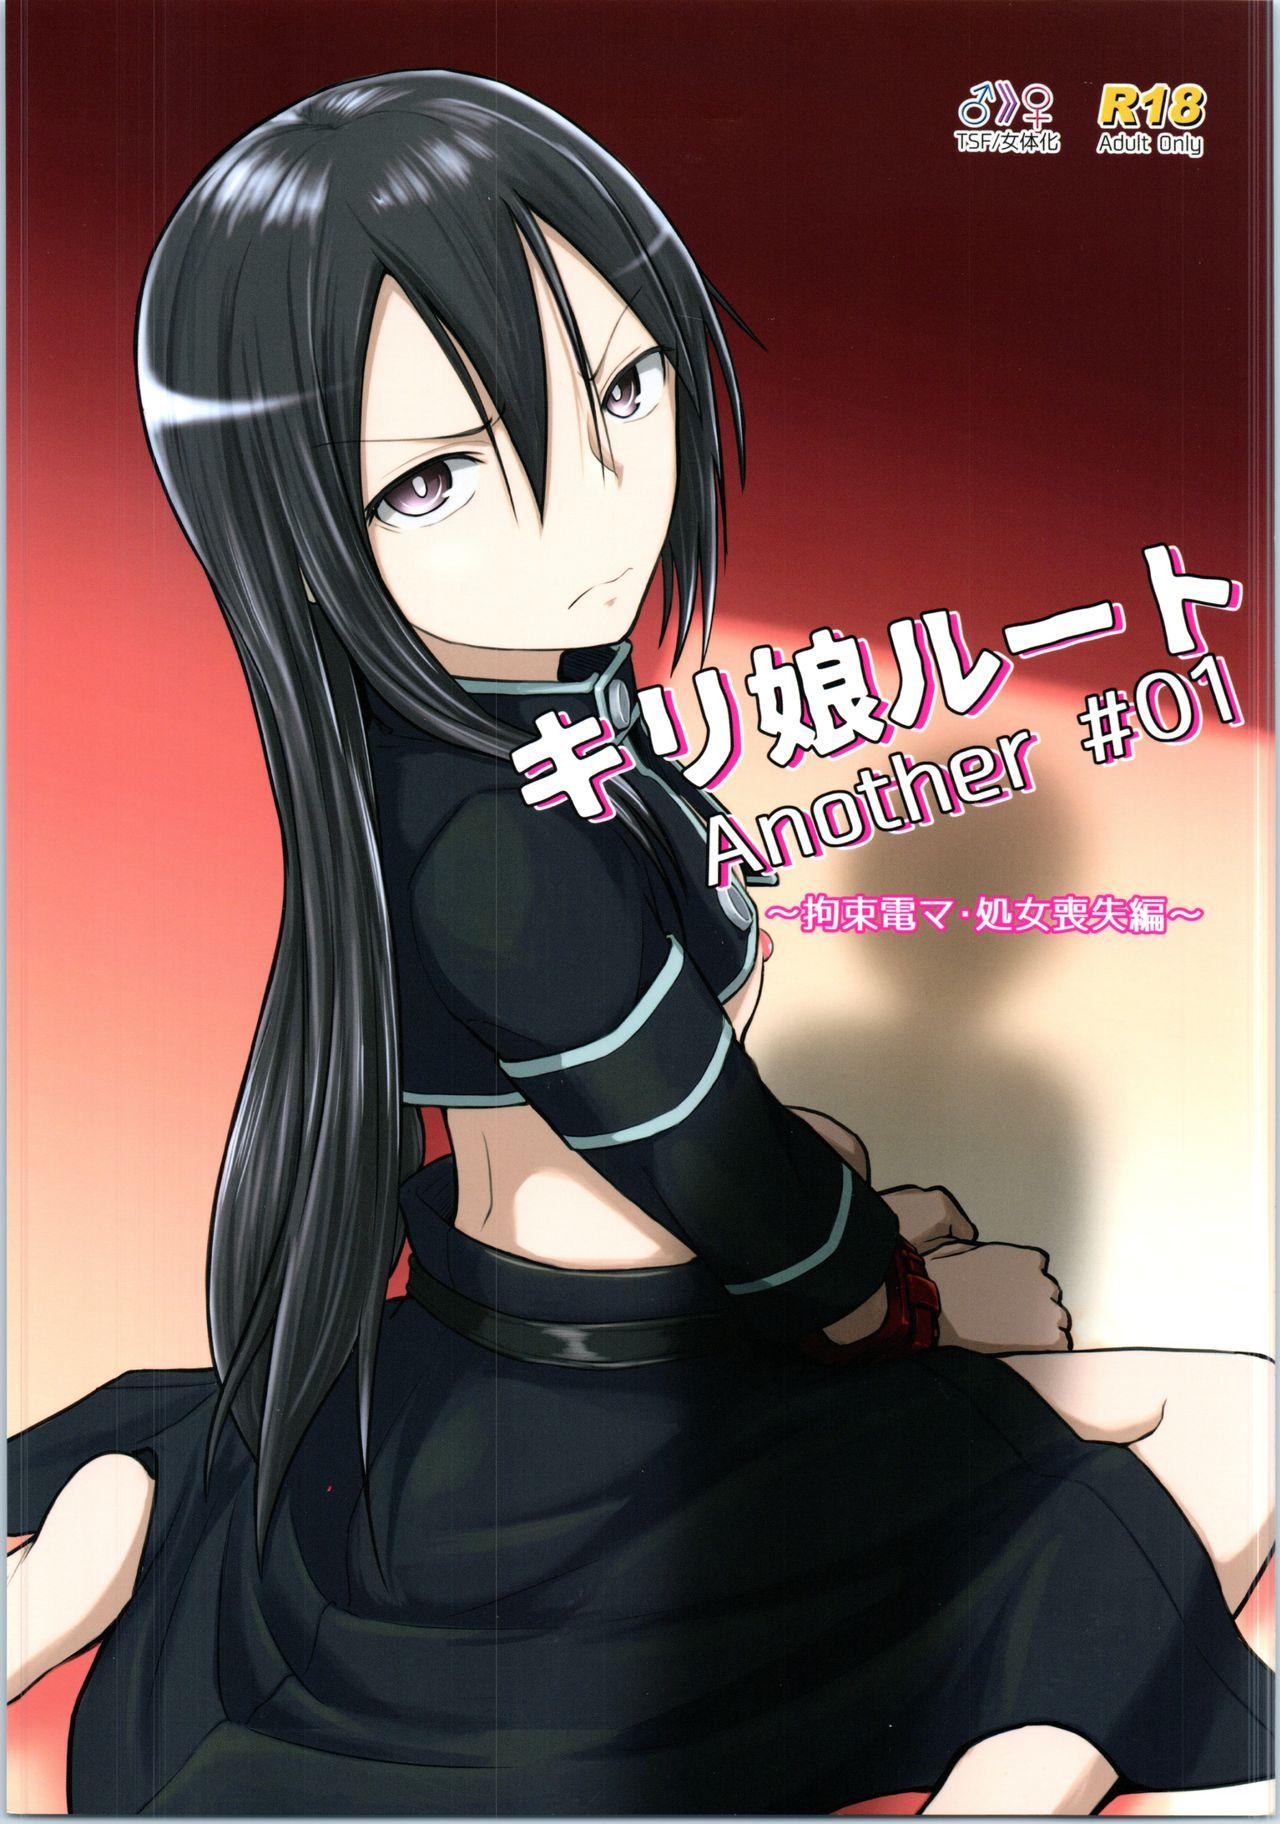 Hard Core Porn Another 01 - Sword art online Tied - Page 1